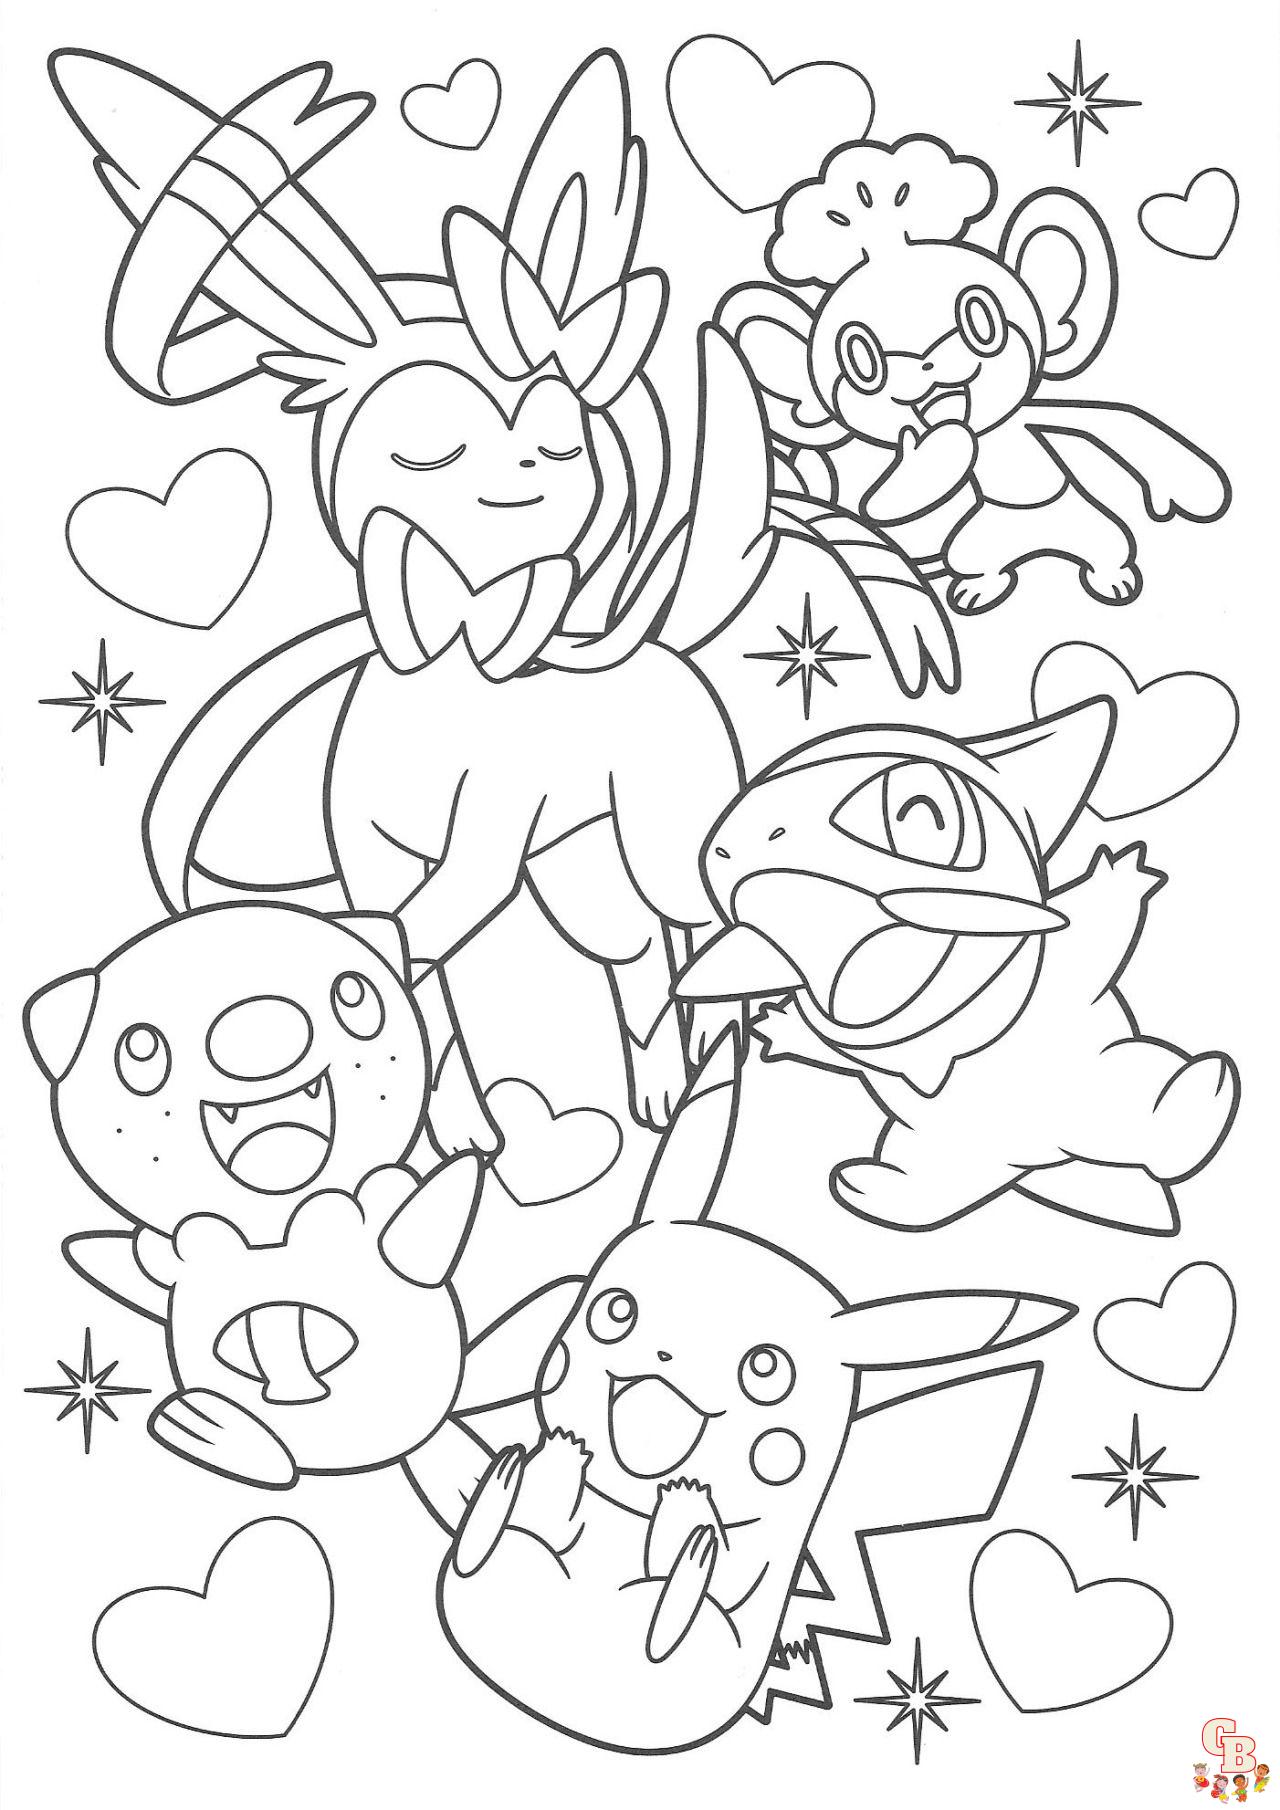 Cute Pokemon coloring pages 2 1